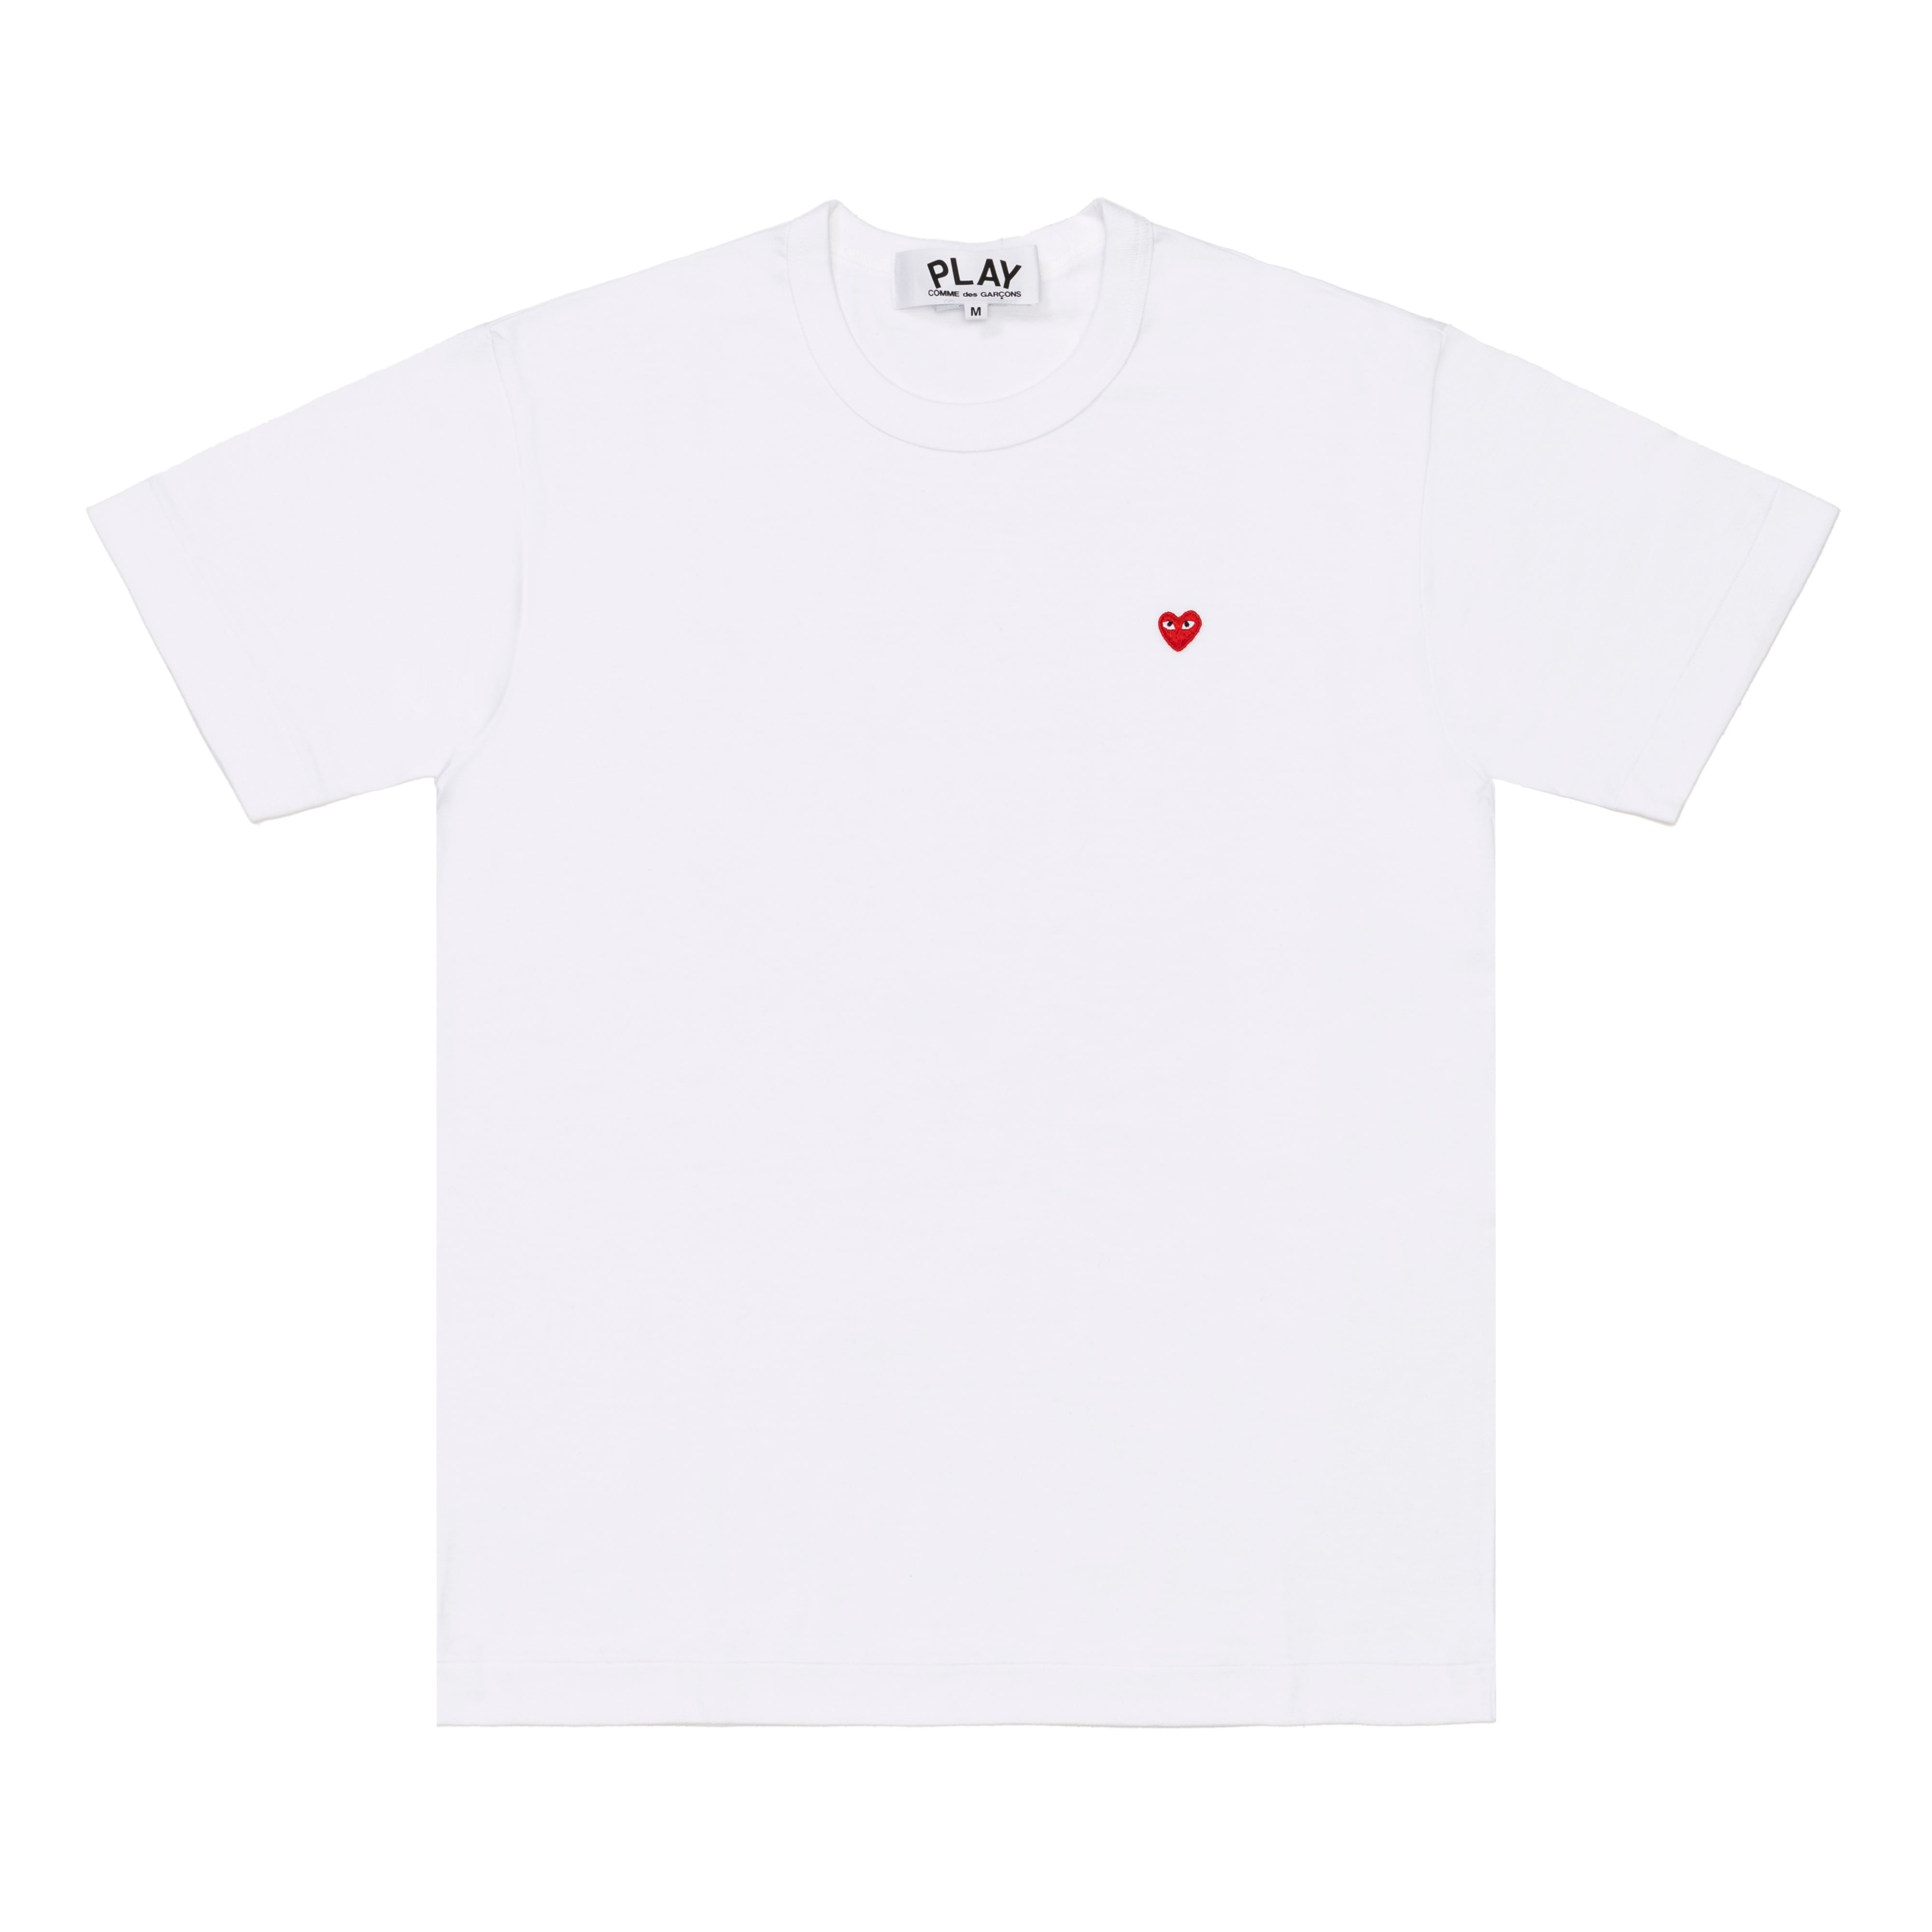 PLAY CDG T-SHIRT WITH SMALL RED HEART - – DSMG E-SHOP